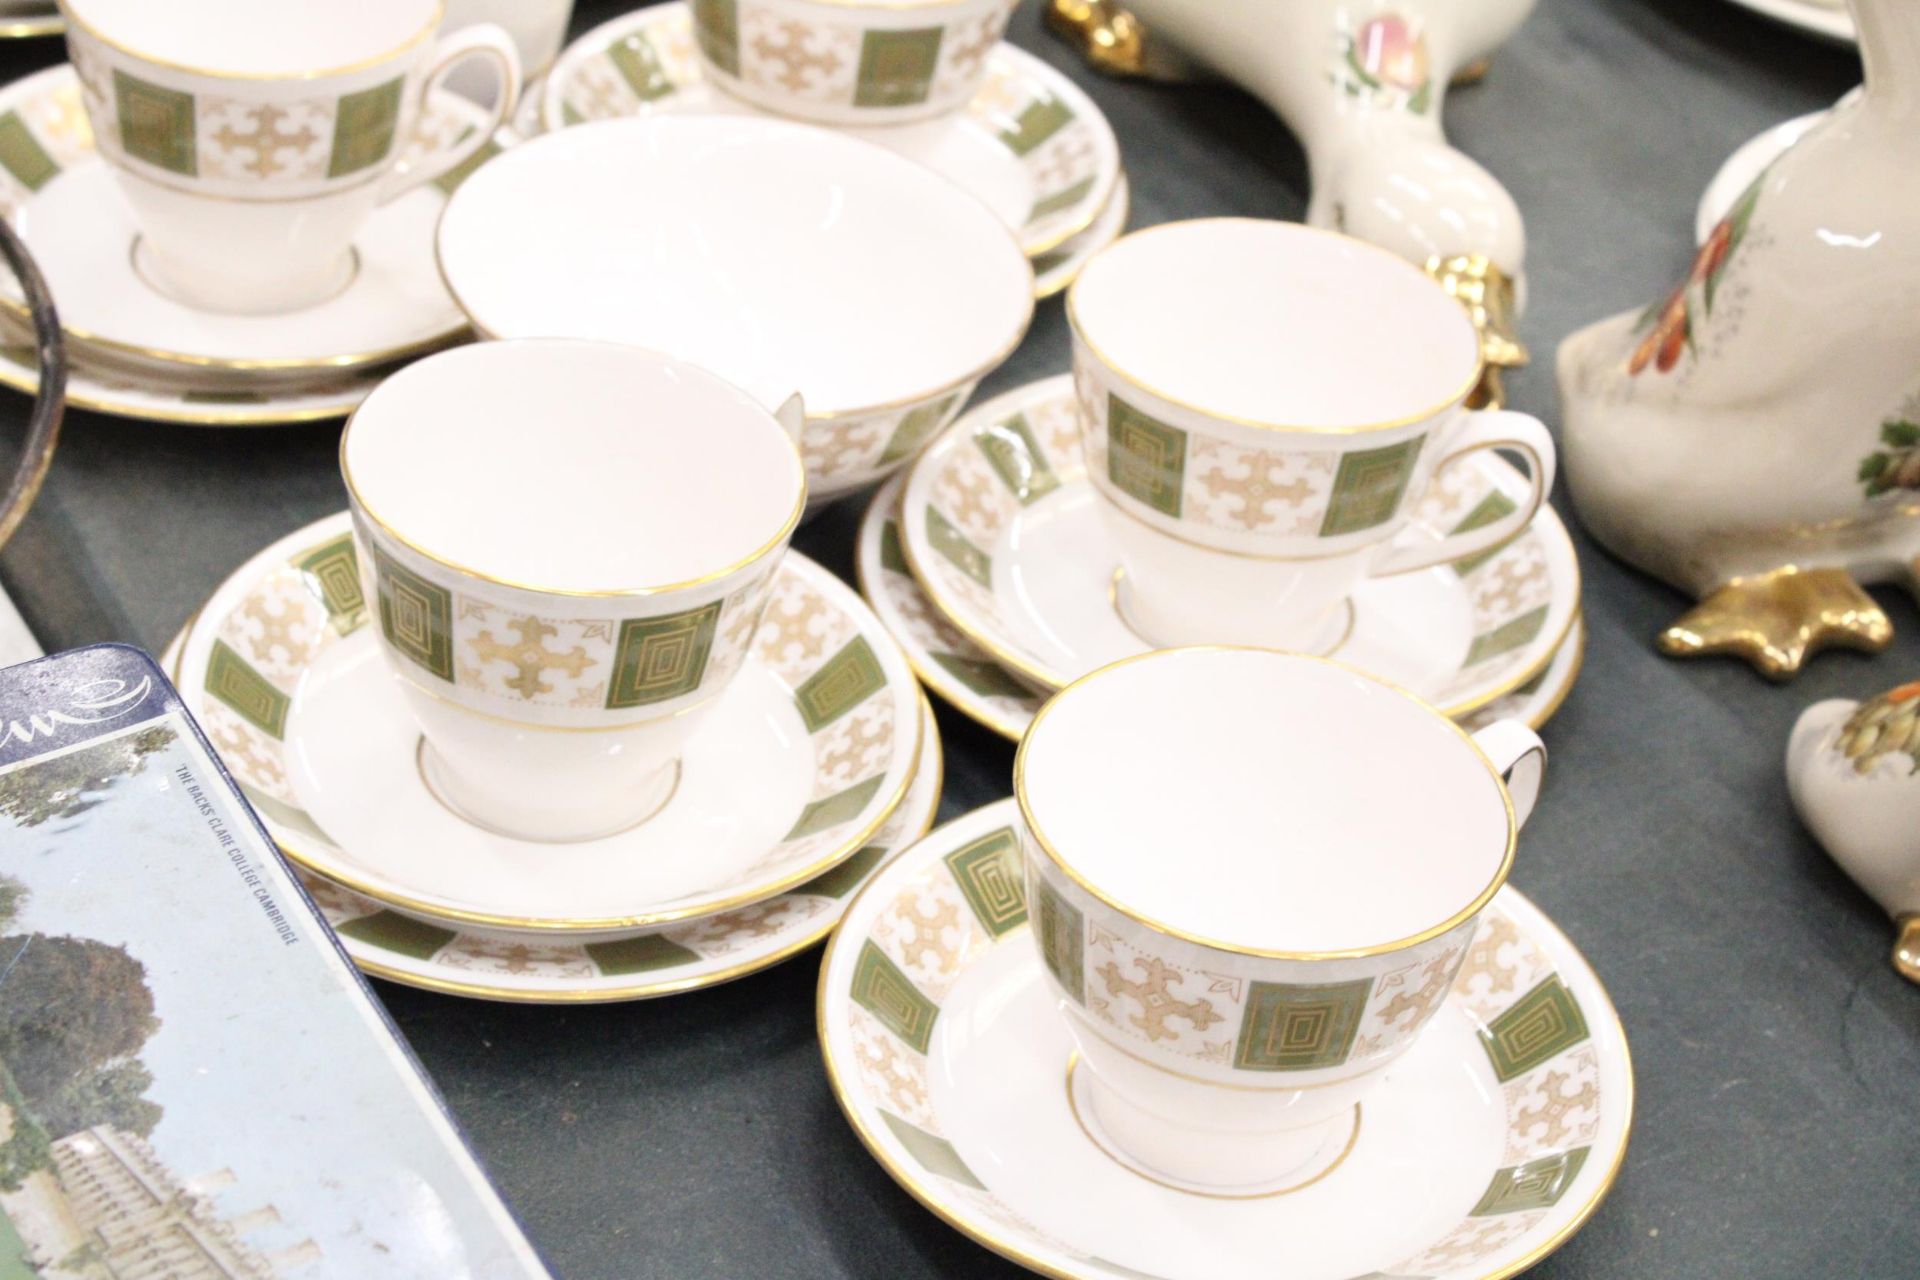 A VINTAGE SPODE, 'PERSIA' TEASET, TO INCLUDE, A CREAM JUG, SUGAR BOWL, CUPS, SAUCERS AND SIDE PLATES - Image 2 of 5